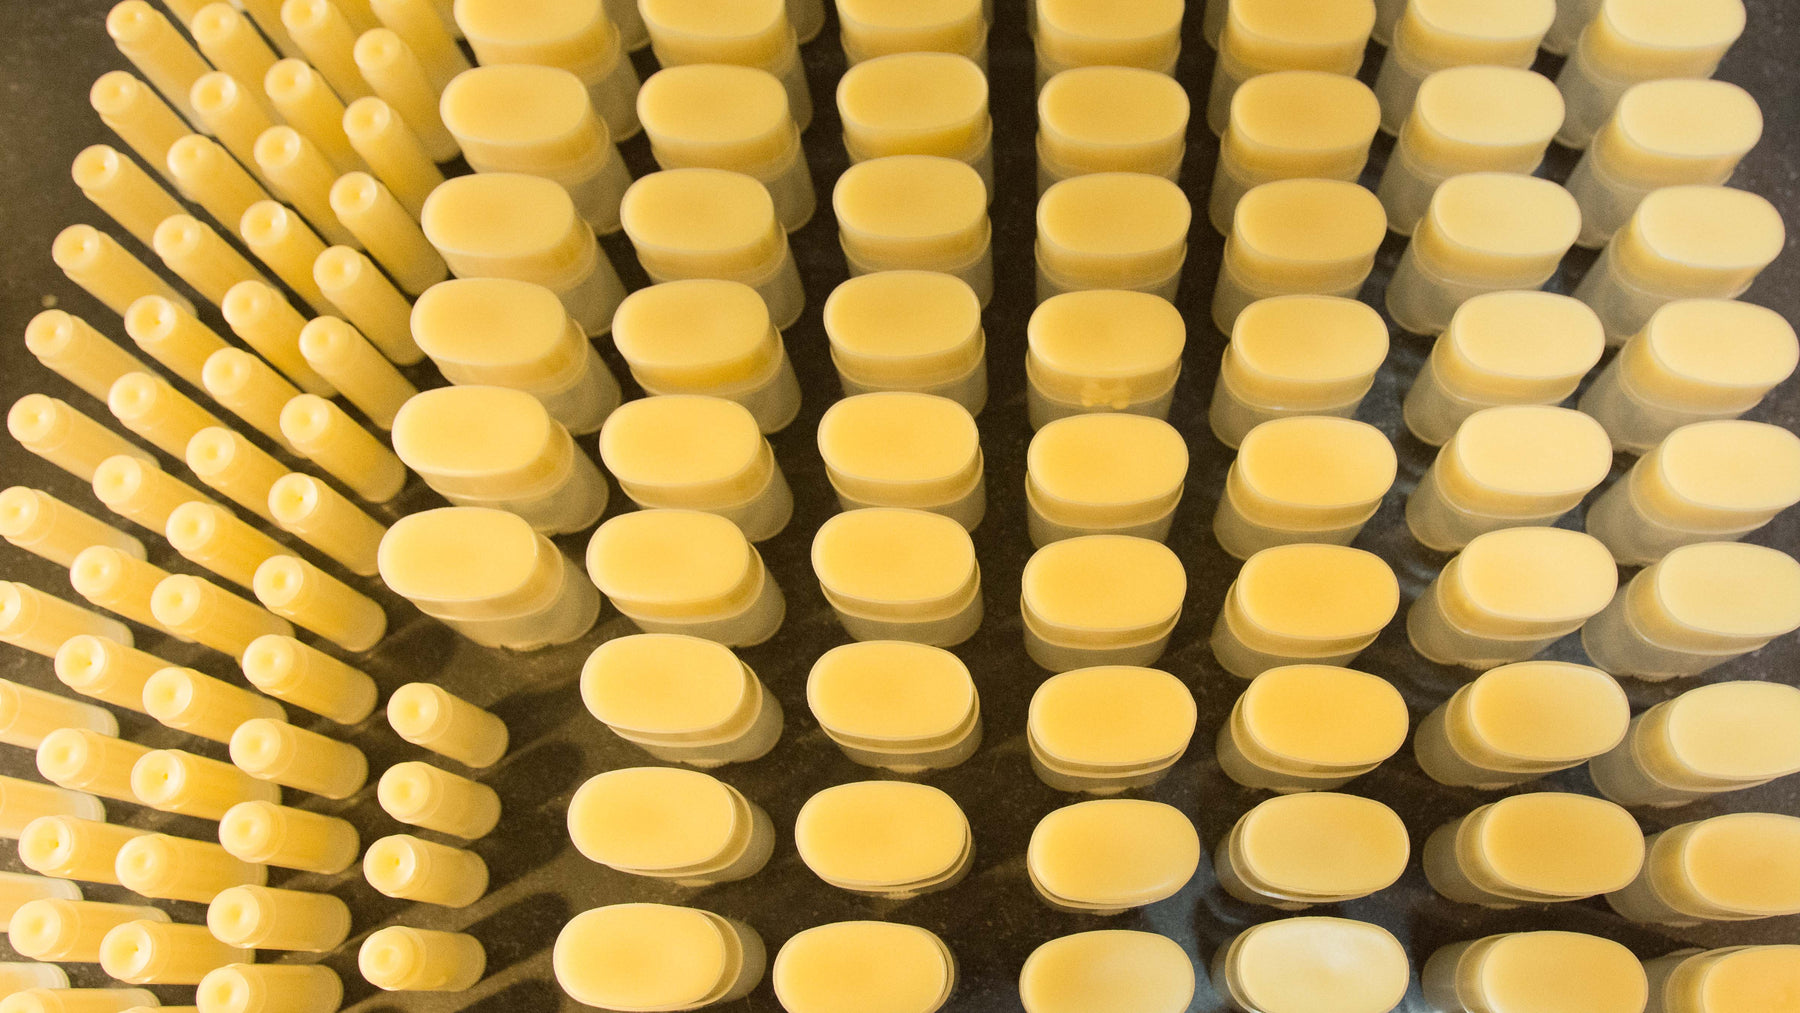 How its made: Lotion Bars